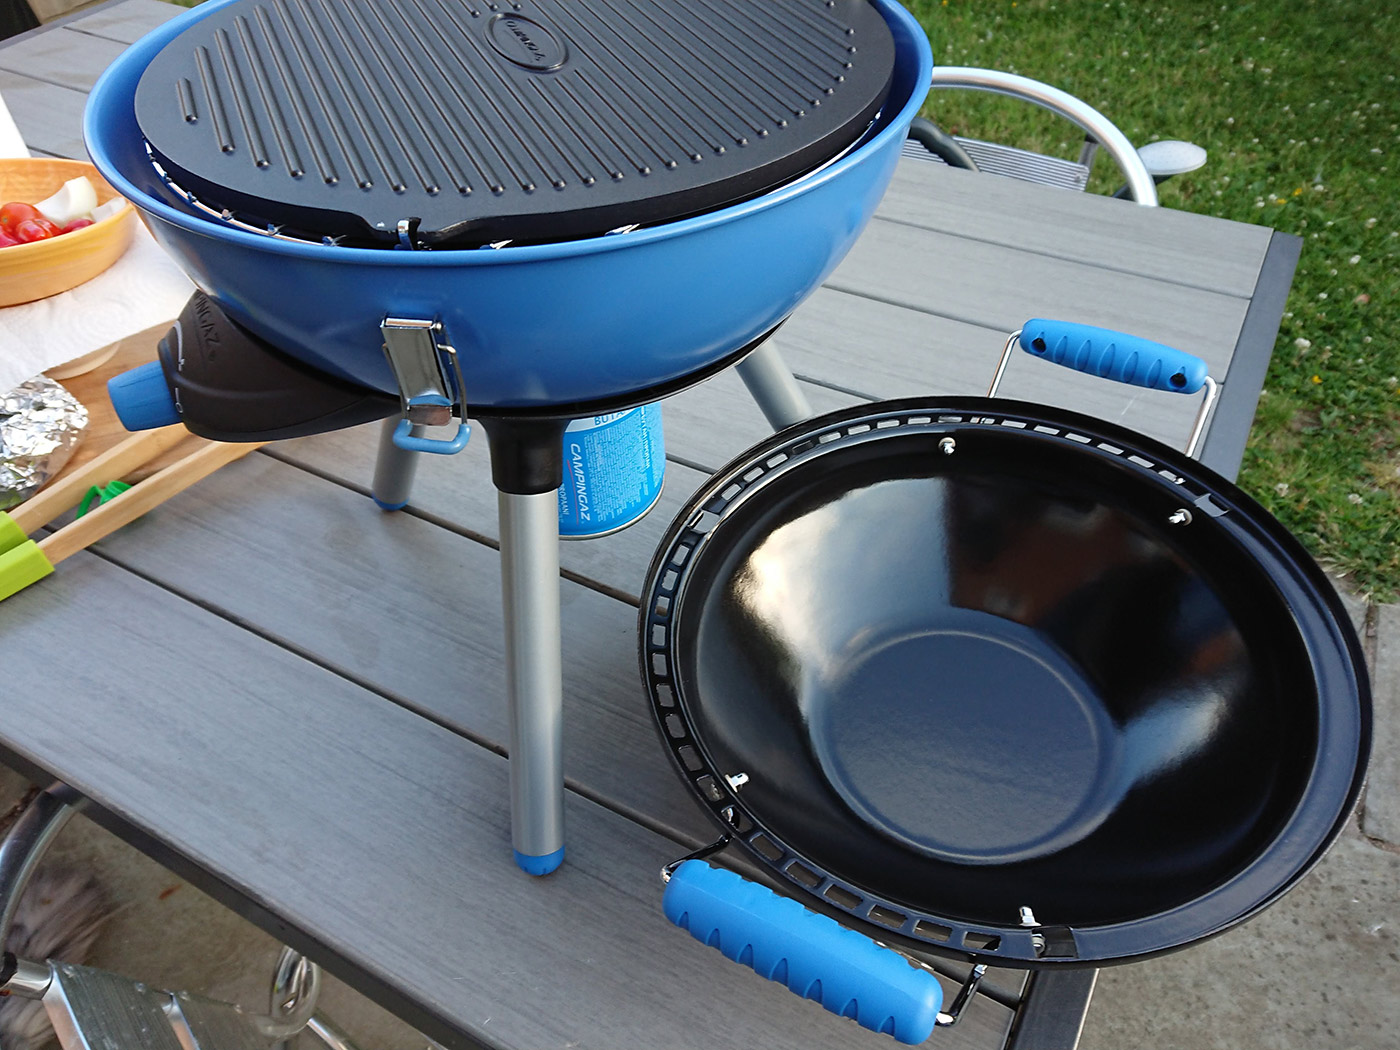 CAMPING | The Campingaz Party Grill To Test